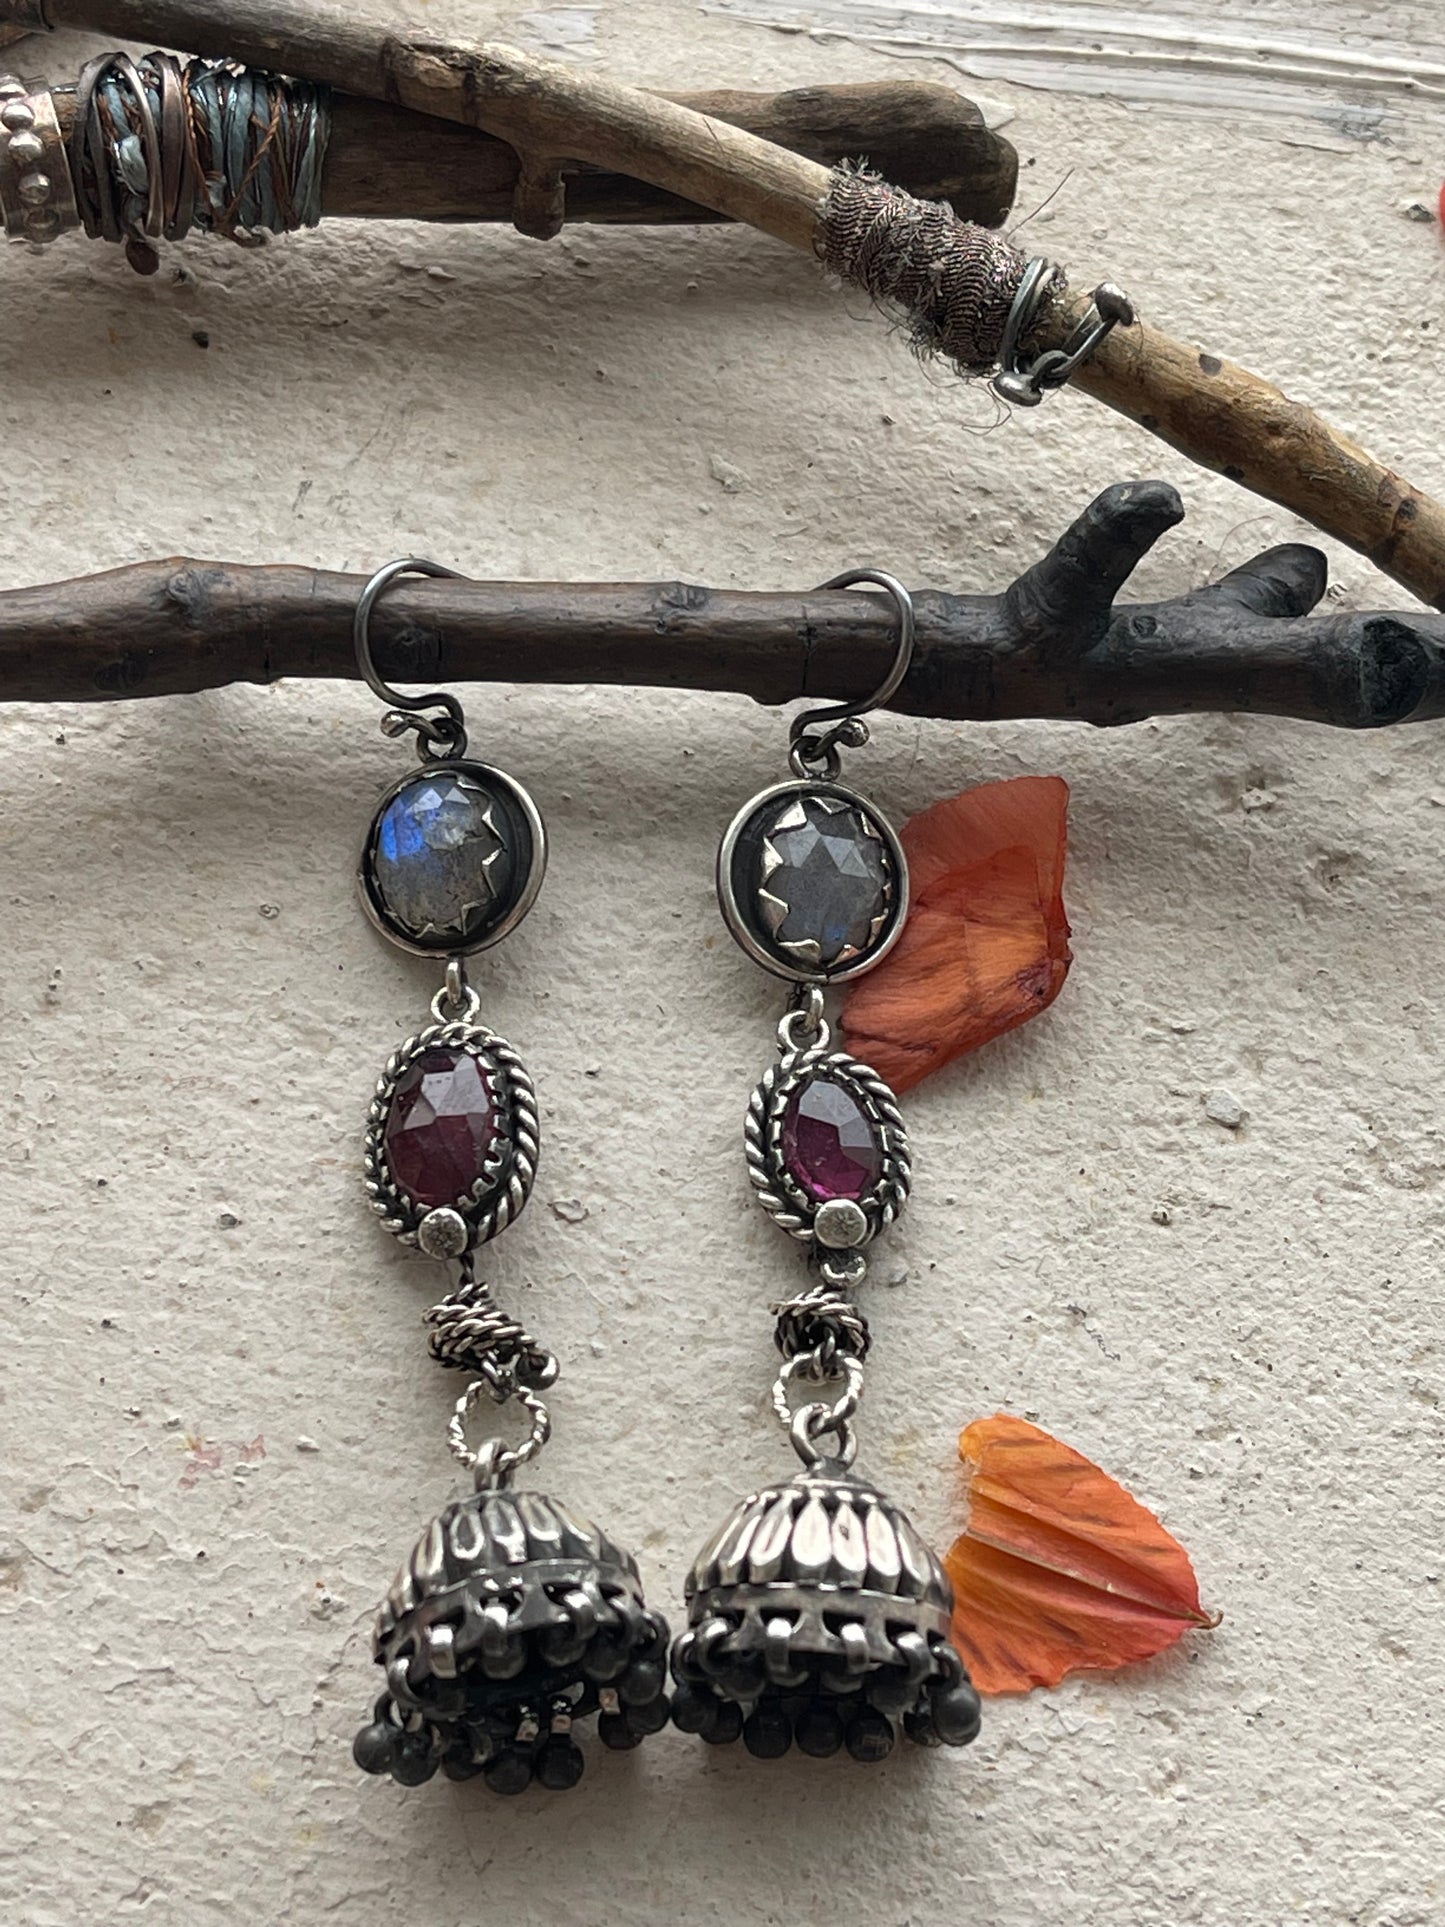 Earrings 256 - Sterling Silver Earrings with Labradorite, Rainbow Tourmaline & Indian Adornments